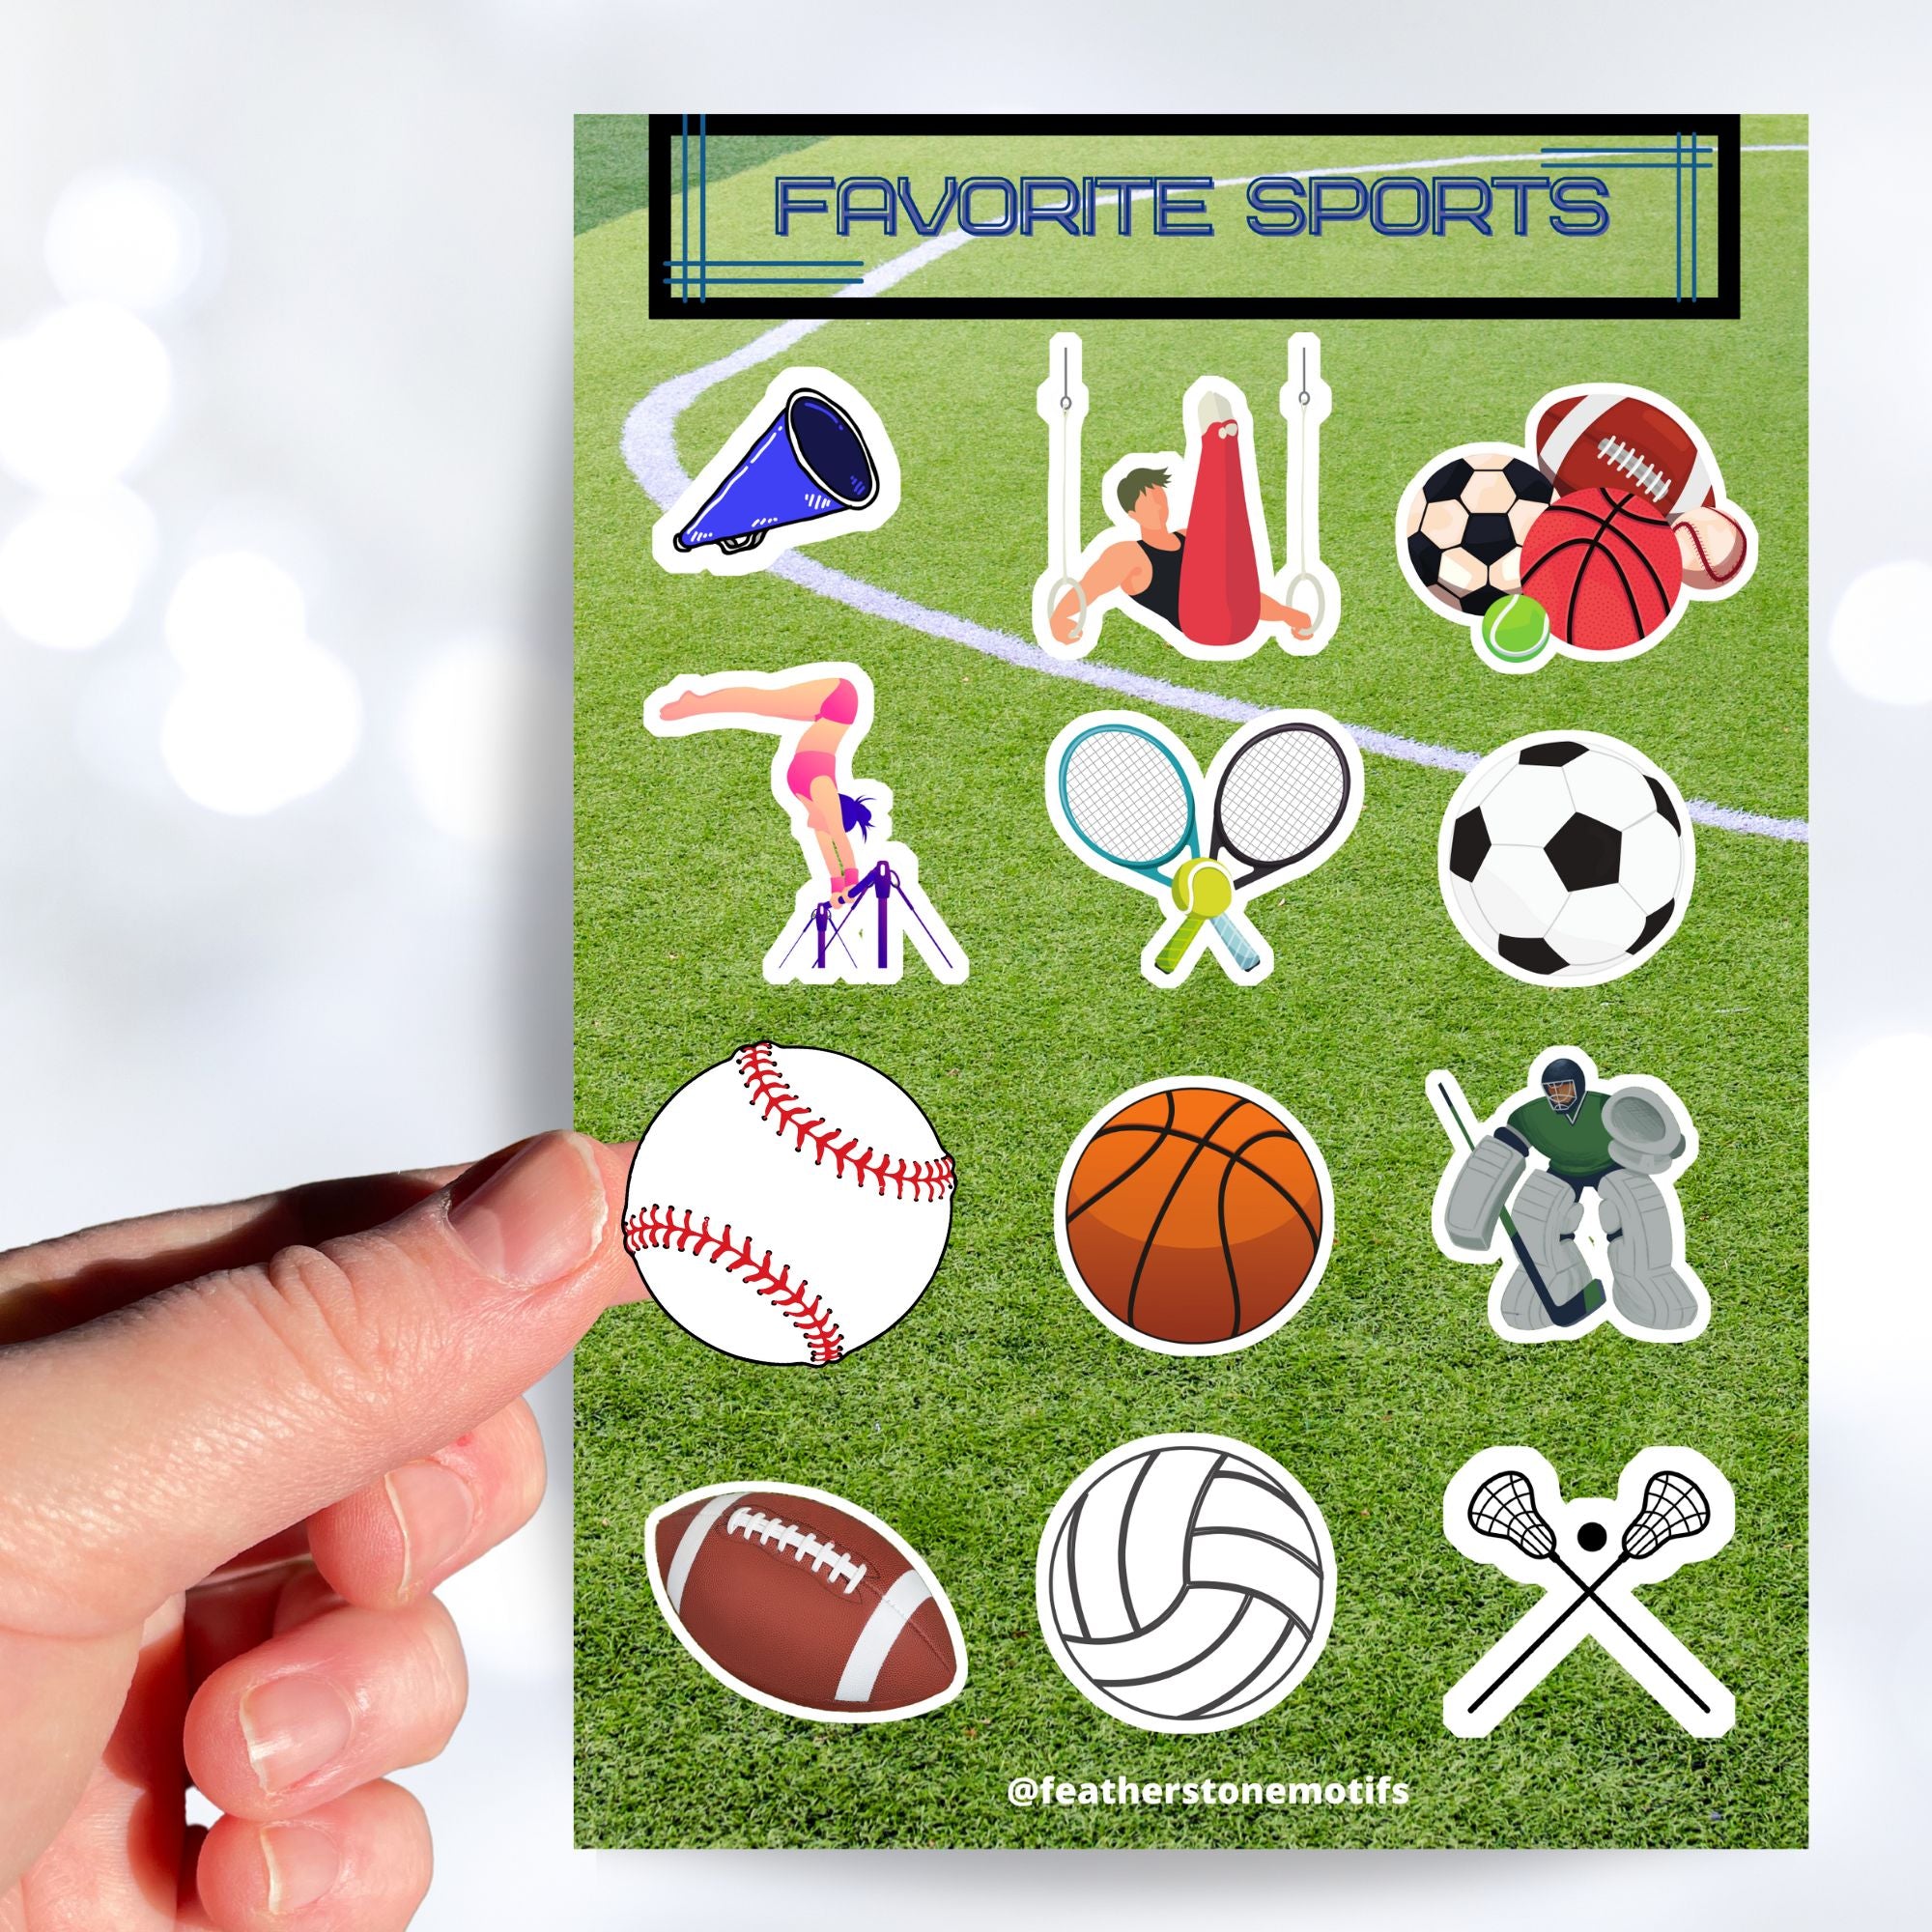 What are your favorite sports? Football, gymnastics, soccer, volleyball, cheer, baseball, hockey, tennis, or lacrosse? If you love any of these then this sticker sheet is perfect for you!  This image shows a hand holding a baseball sticker above the Favorite Sports sticker sheet.